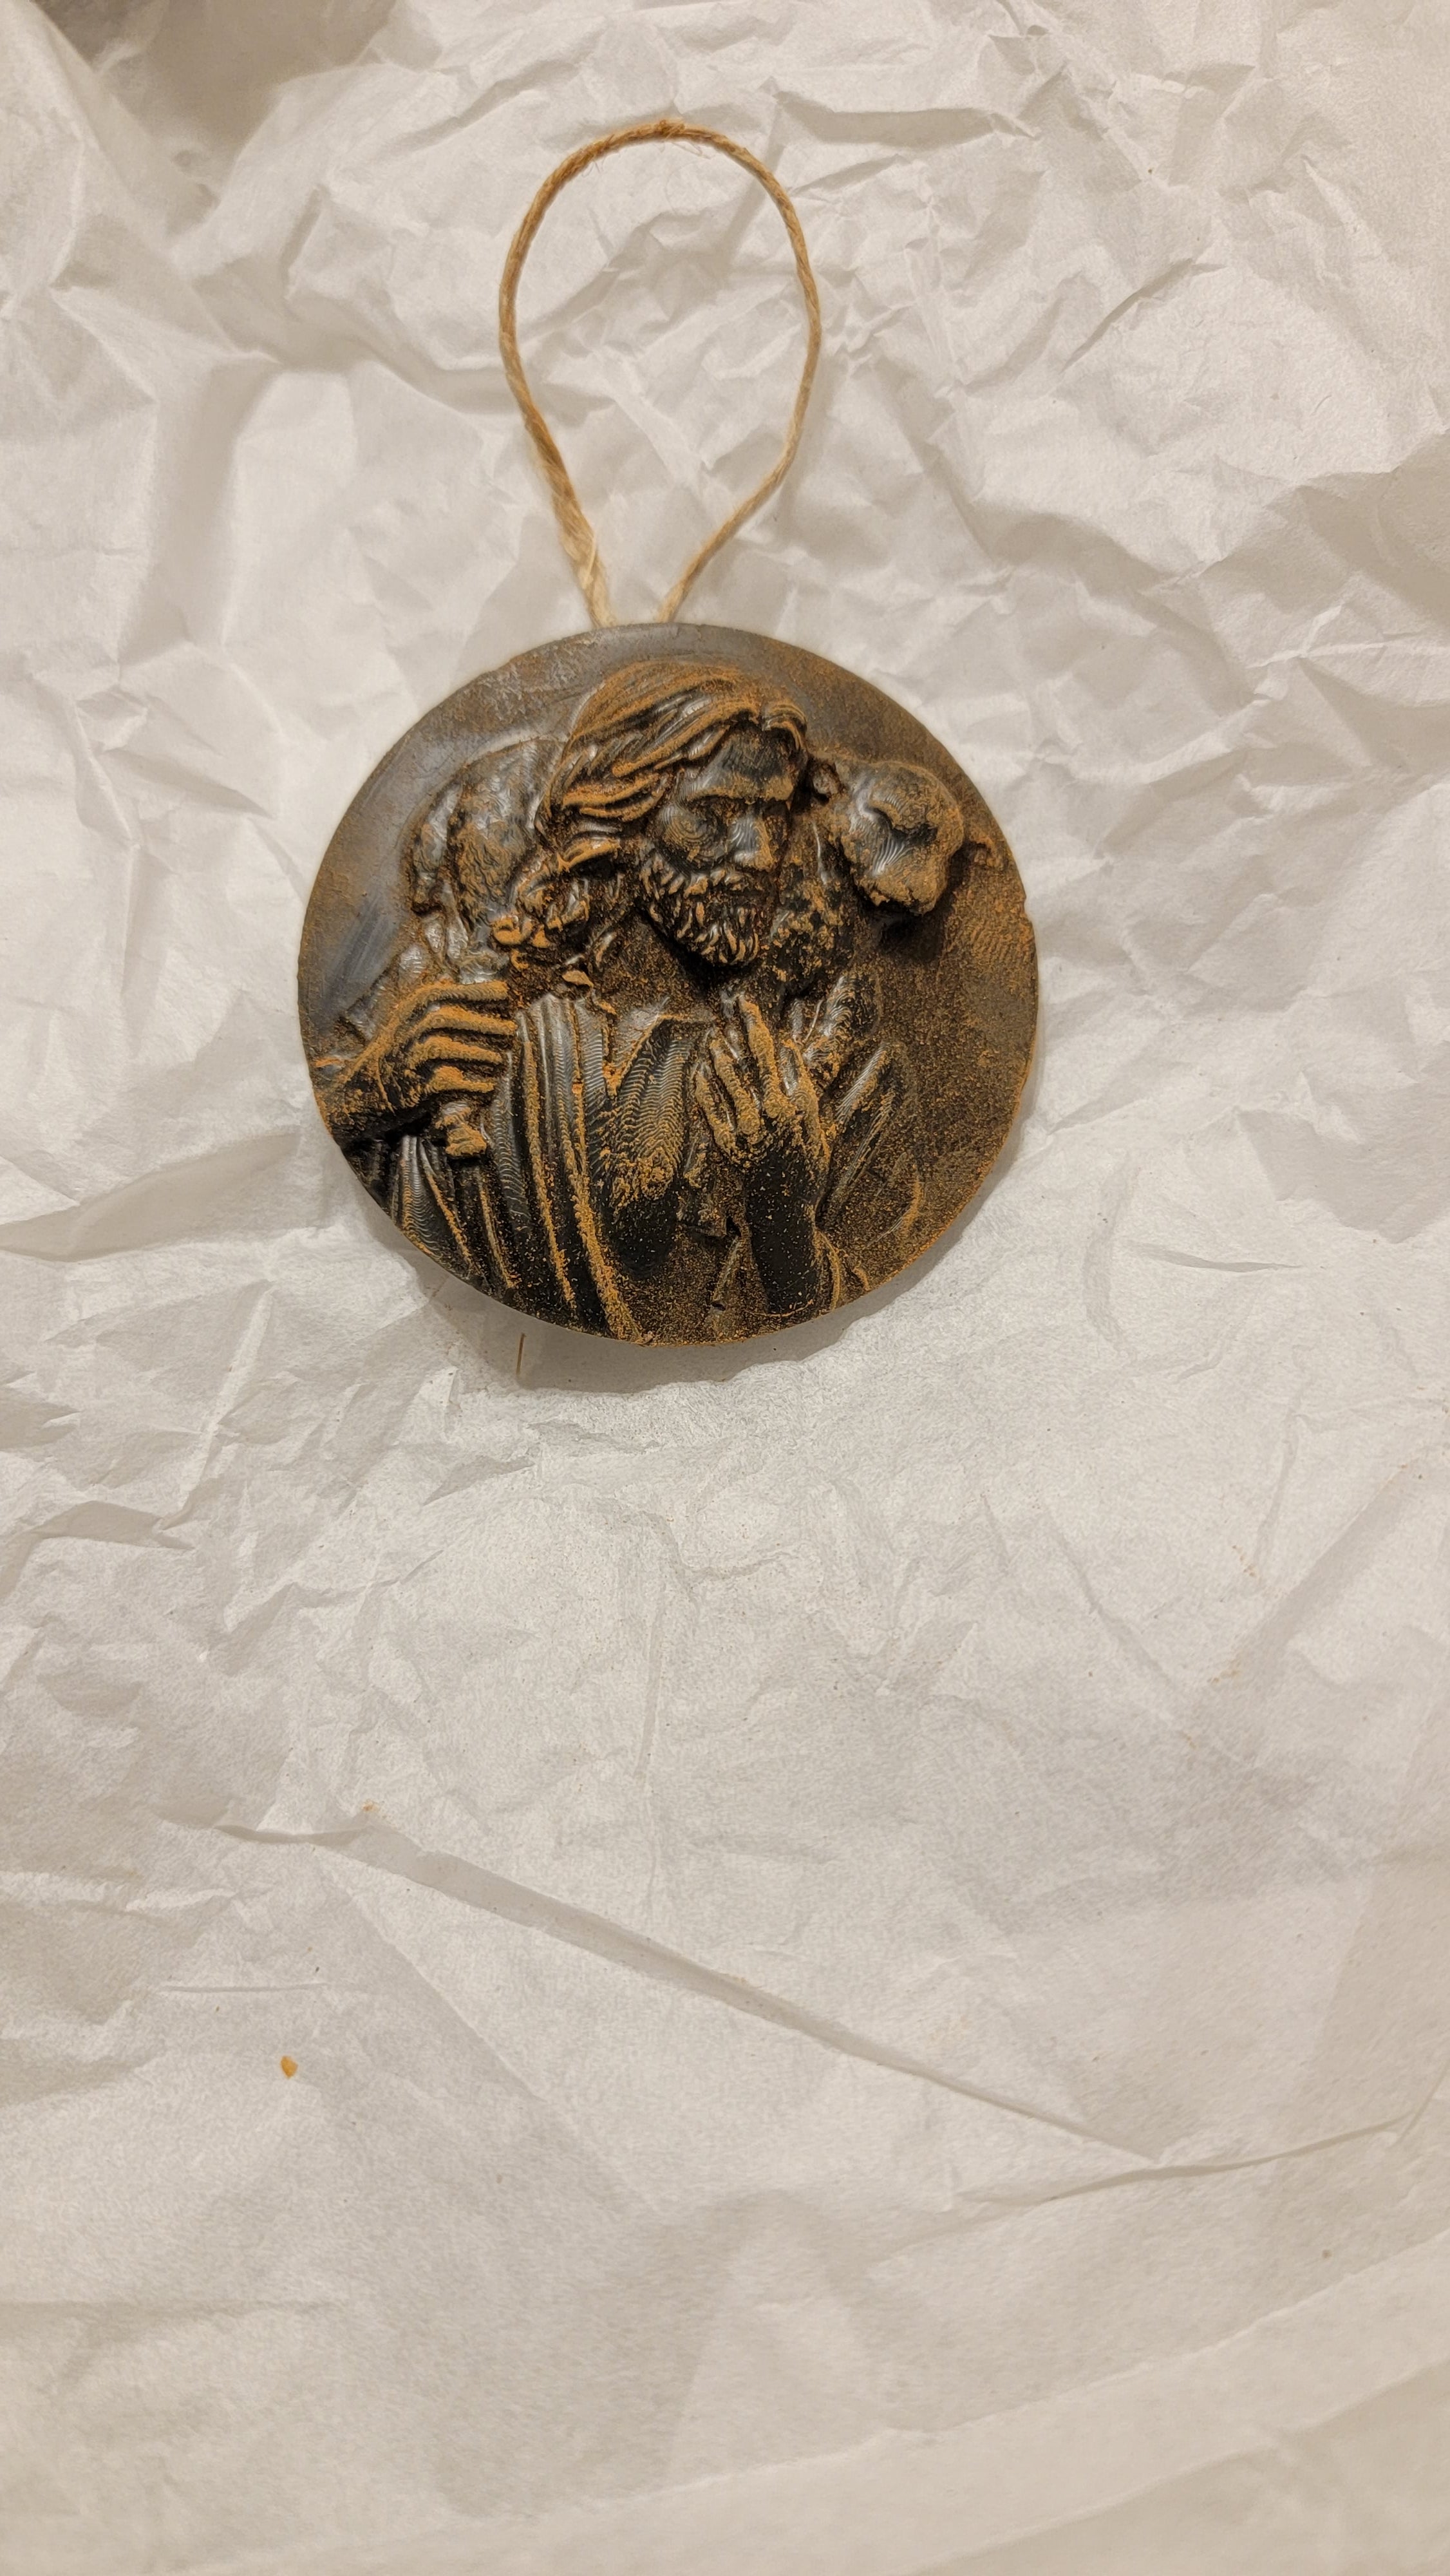 Christ and the Lost Sheep Ornament